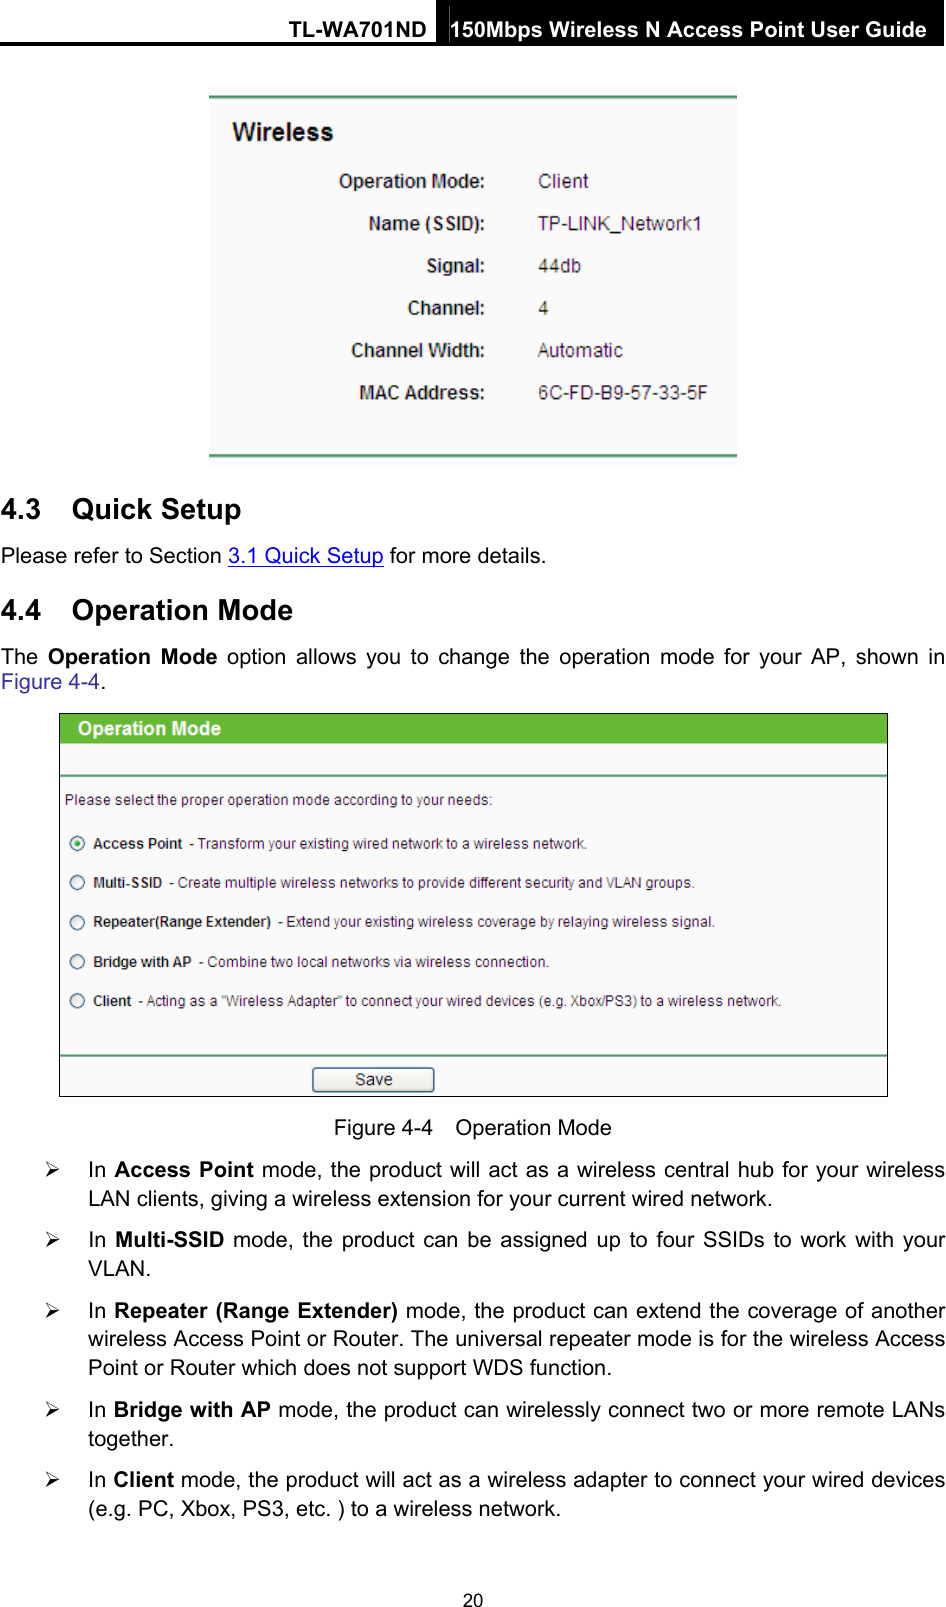 TL-WA701ND 150Mbps Wireless N Access Point User Guide  4.3  Quick Setup Please refer to Section 3.1 Quick Setup for more details. 4.4  Operation Mode The  Operation Mode option allows you to change the operation mode for your AP, shown in Figure 4-4.  Figure 4-4  Operation Mode ¾ In Access Point mode, the product will act as a wireless central hub for your wireless LAN clients, giving a wireless extension for your current wired network. ¾ In Multi-SSID mode, the product can be assigned up to four SSIDs to work with your VLAN. ¾ In Repeater (Range Extender) mode, the product can extend the coverage of another wireless Access Point or Router. The universal repeater mode is for the wireless Access Point or Router which does not support WDS function. ¾ In Bridge with AP mode, the product can wirelessly connect two or more remote LANs together. ¾ In Client mode, the product will act as a wireless adapter to connect your wired devices (e.g. PC, Xbox, PS3, etc. ) to a wireless network. 20 